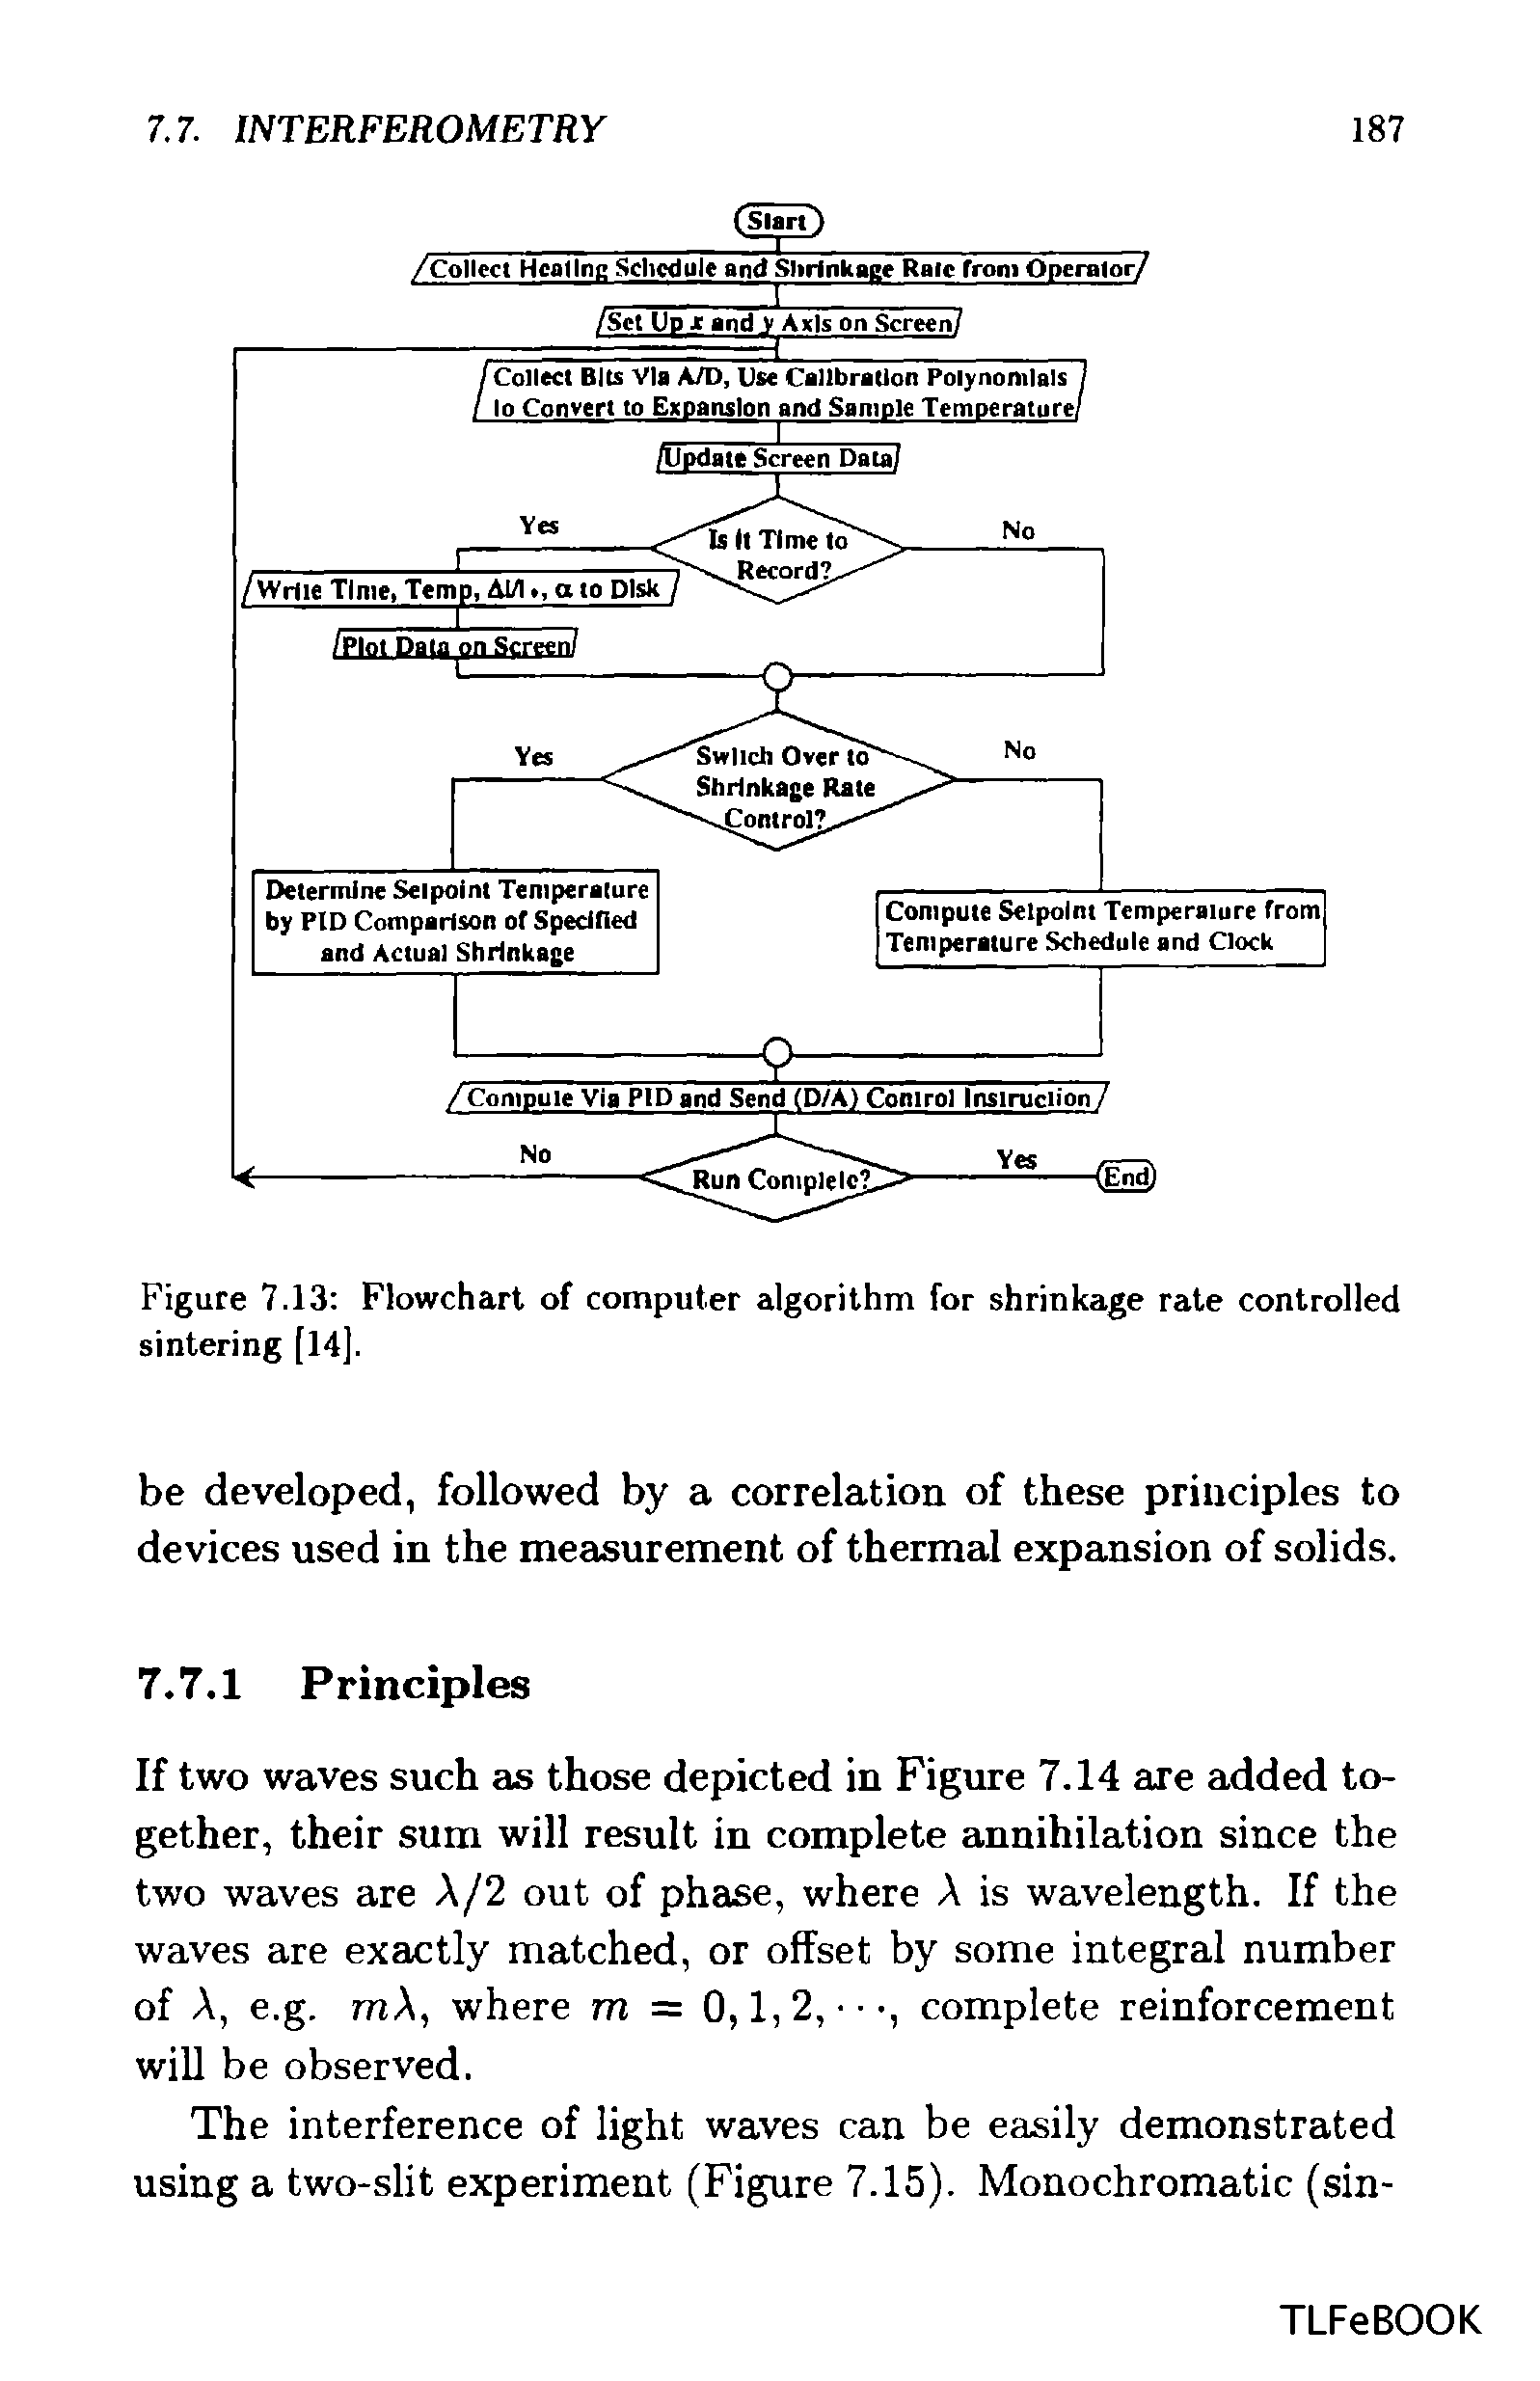 Figure 7.13 Flowchart of computer algorithm for shrinkage rate controlled sintering [14].